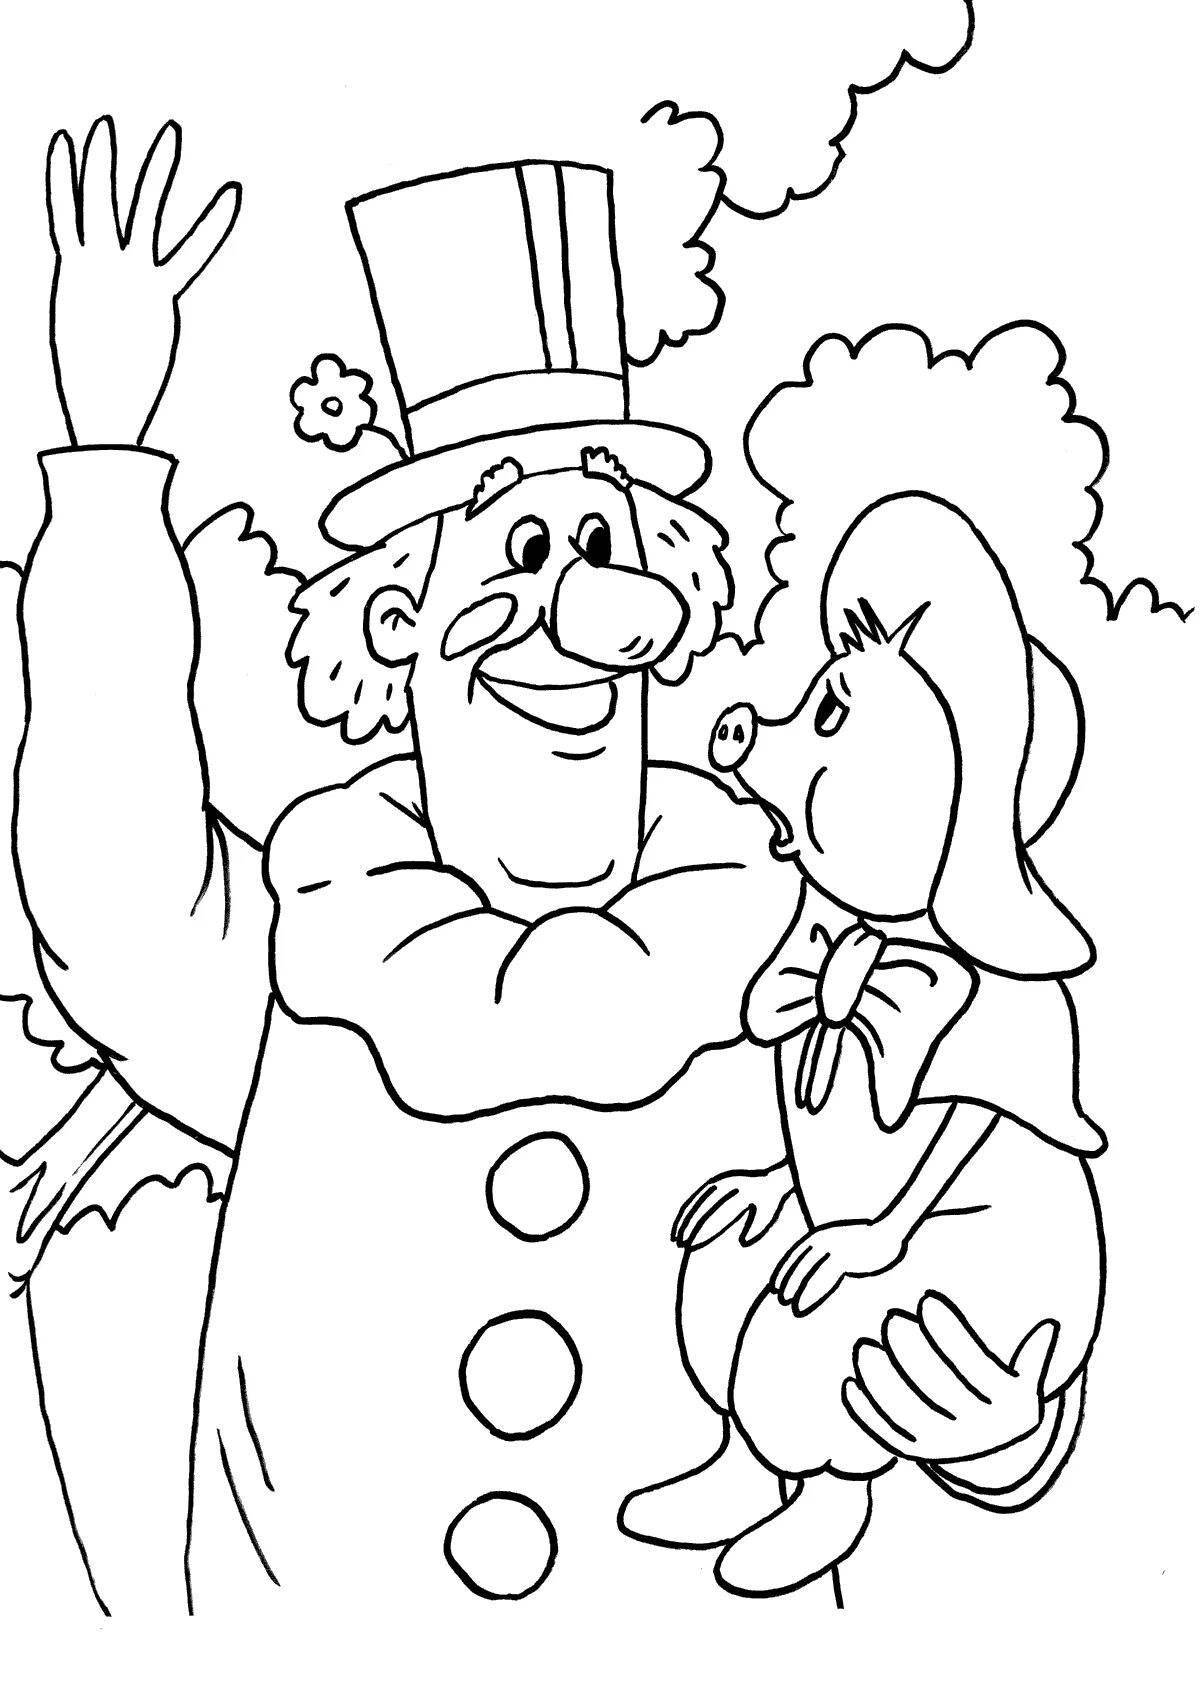 Fabulous pound coloring page for kids